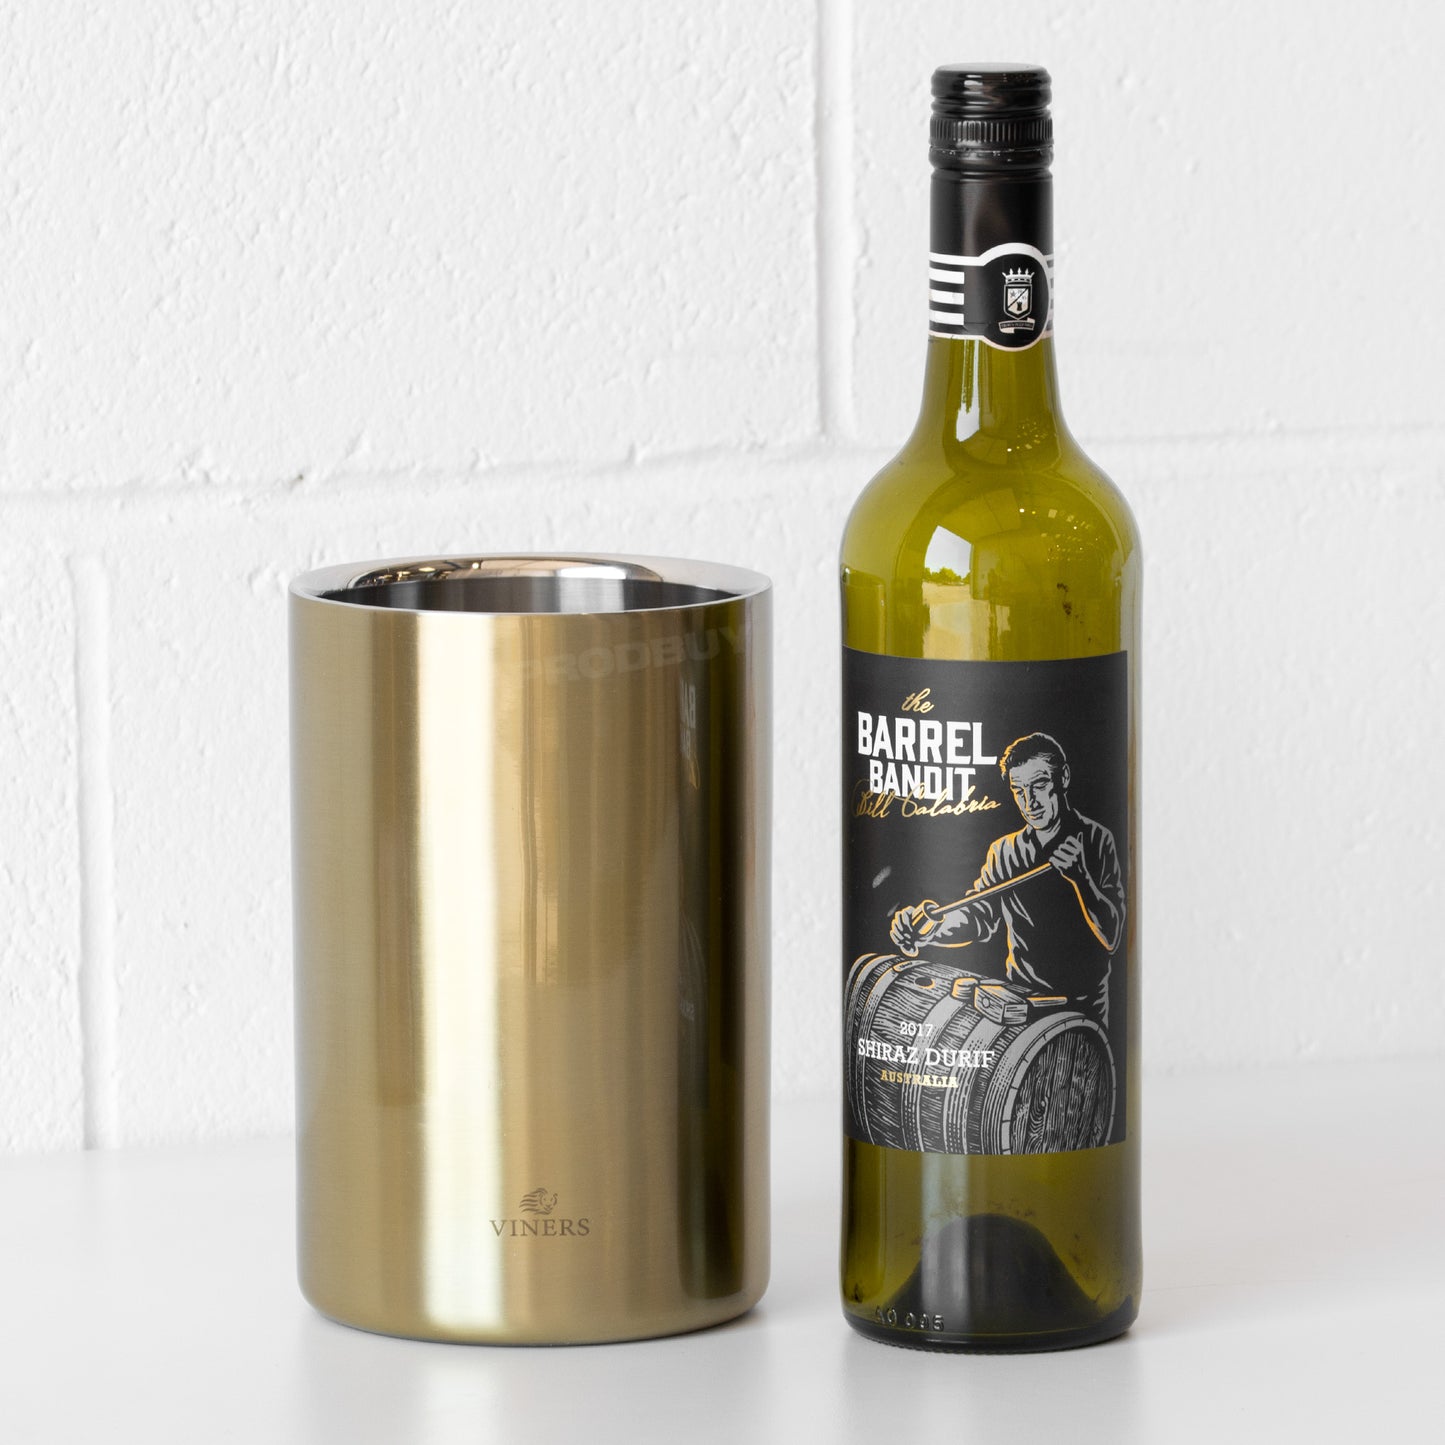 Viners Gold Brushed Double Wall Wine Bottle Cooler